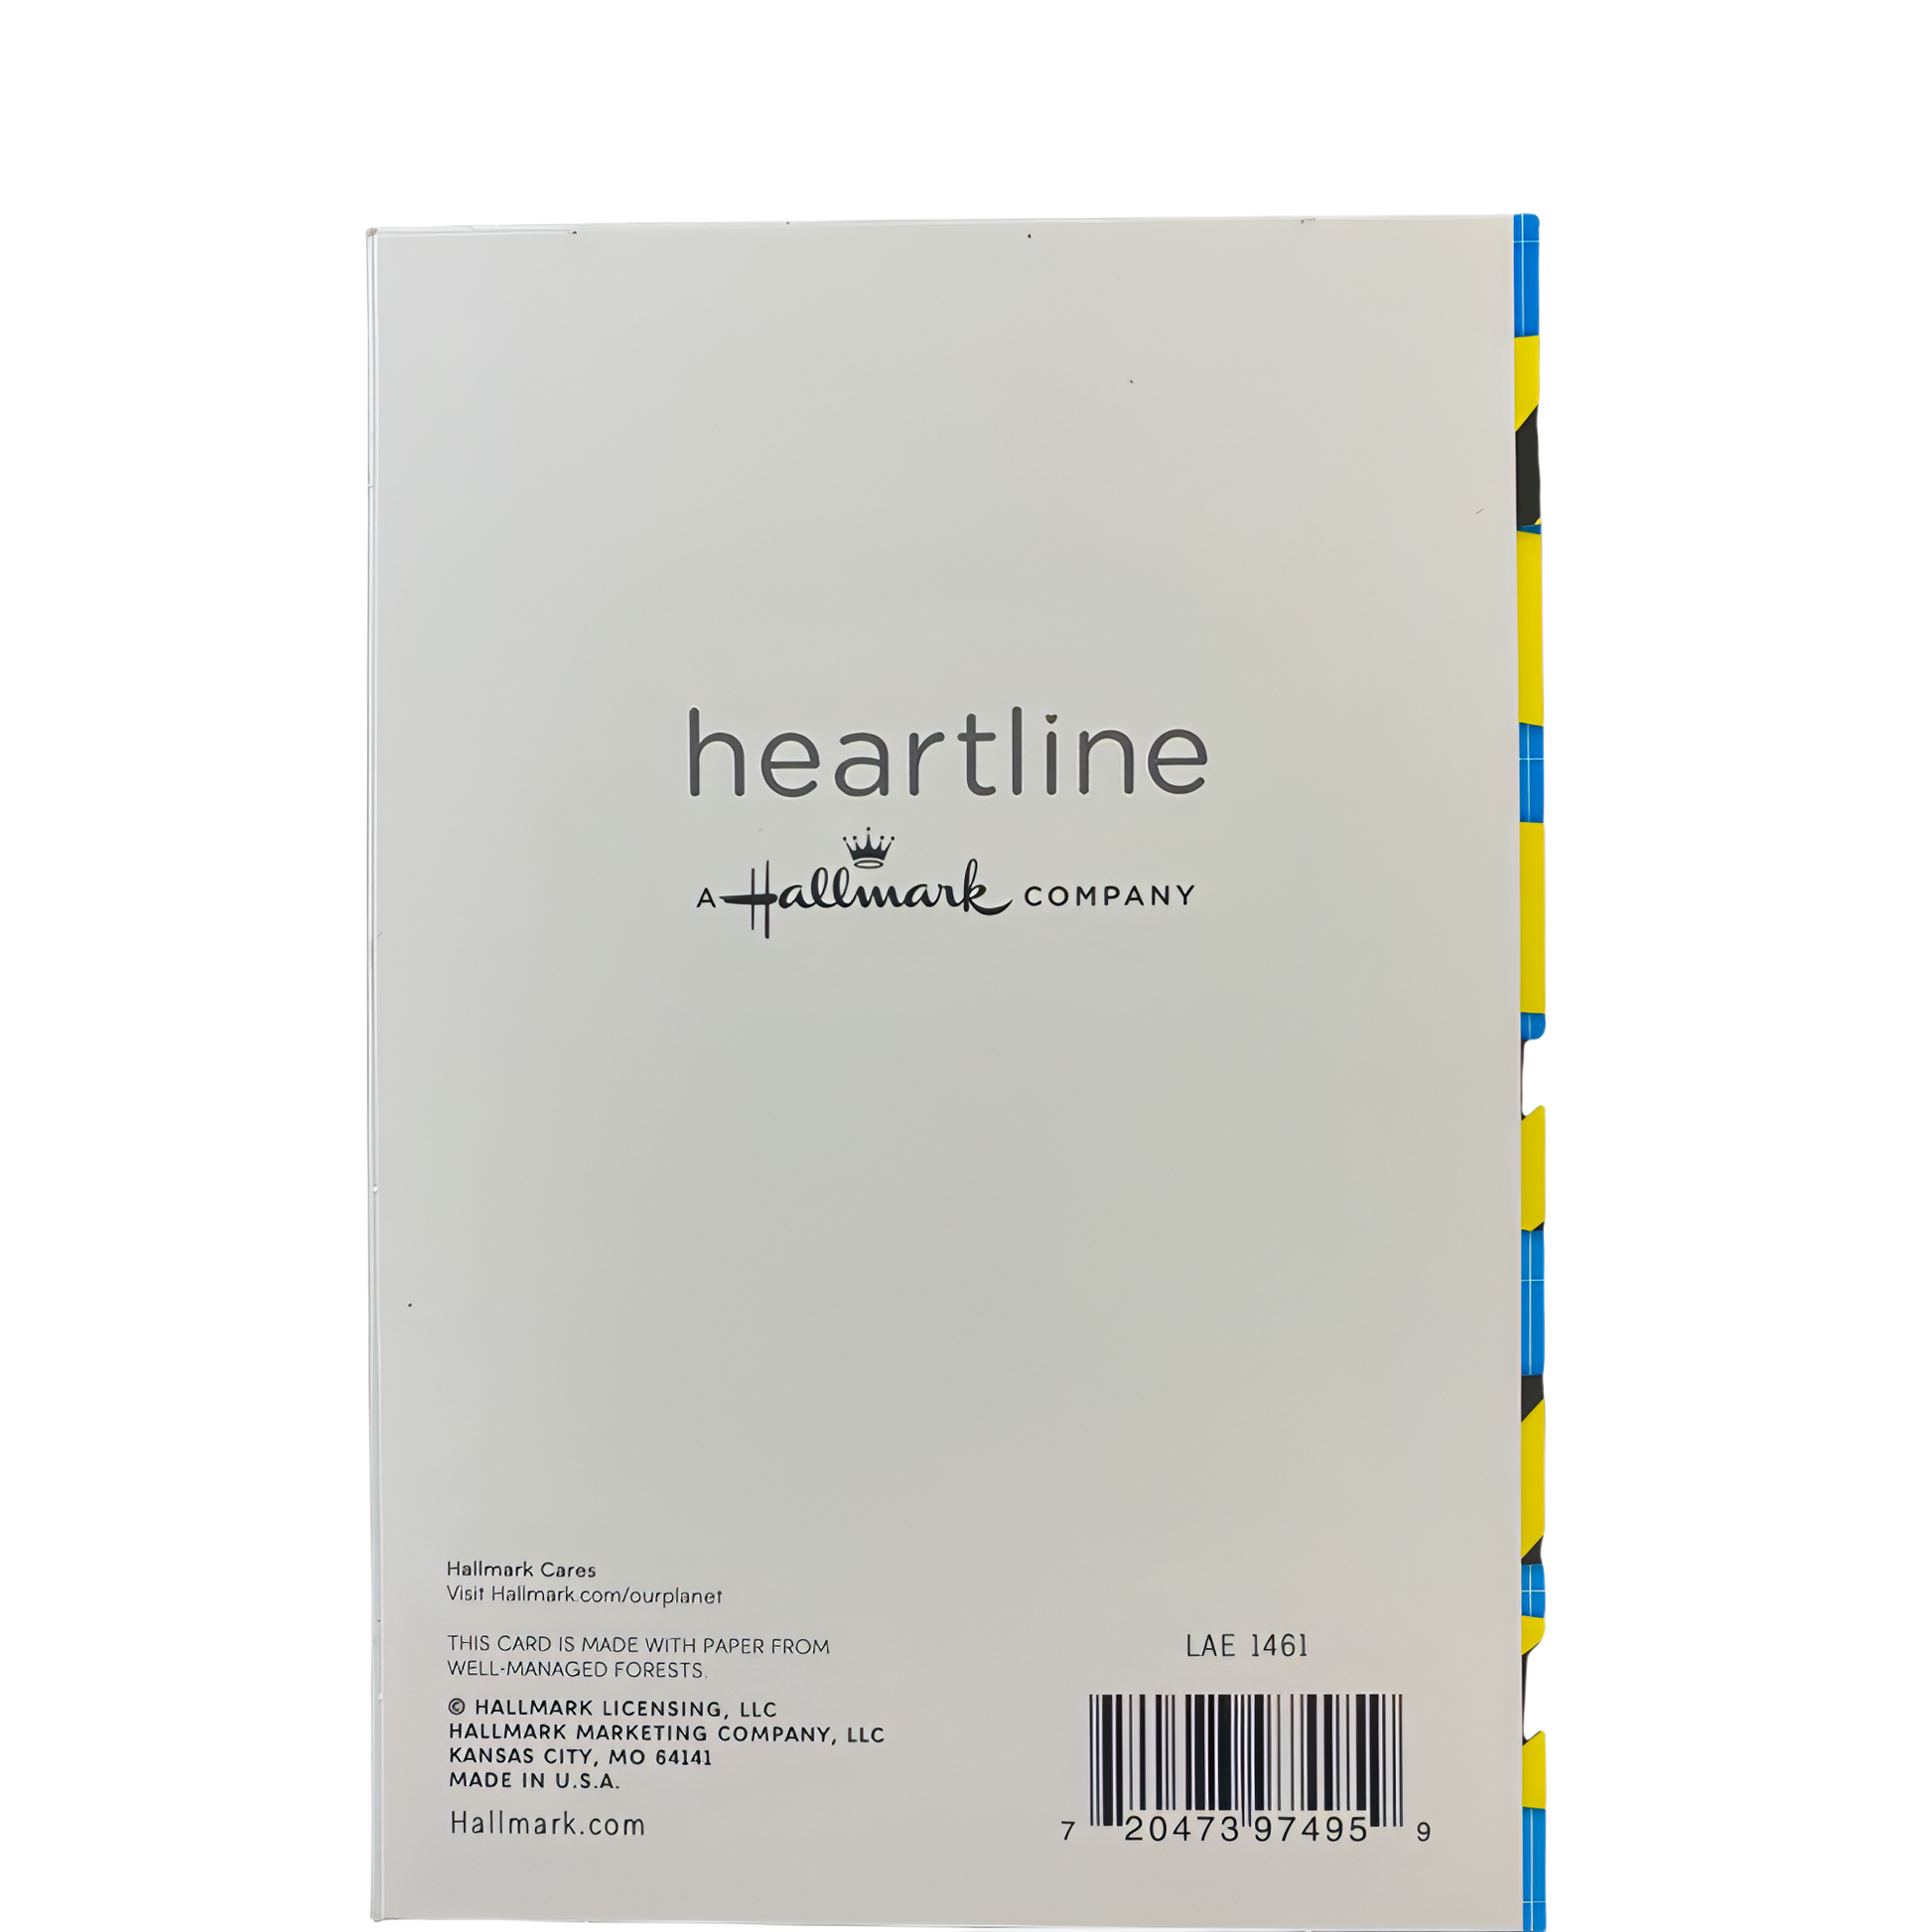 Birthday Card with Envelope - Heartline by Hallmark - "DON'T LOSE THIS BIRTHDAY CARD!" - Brandat Outlet